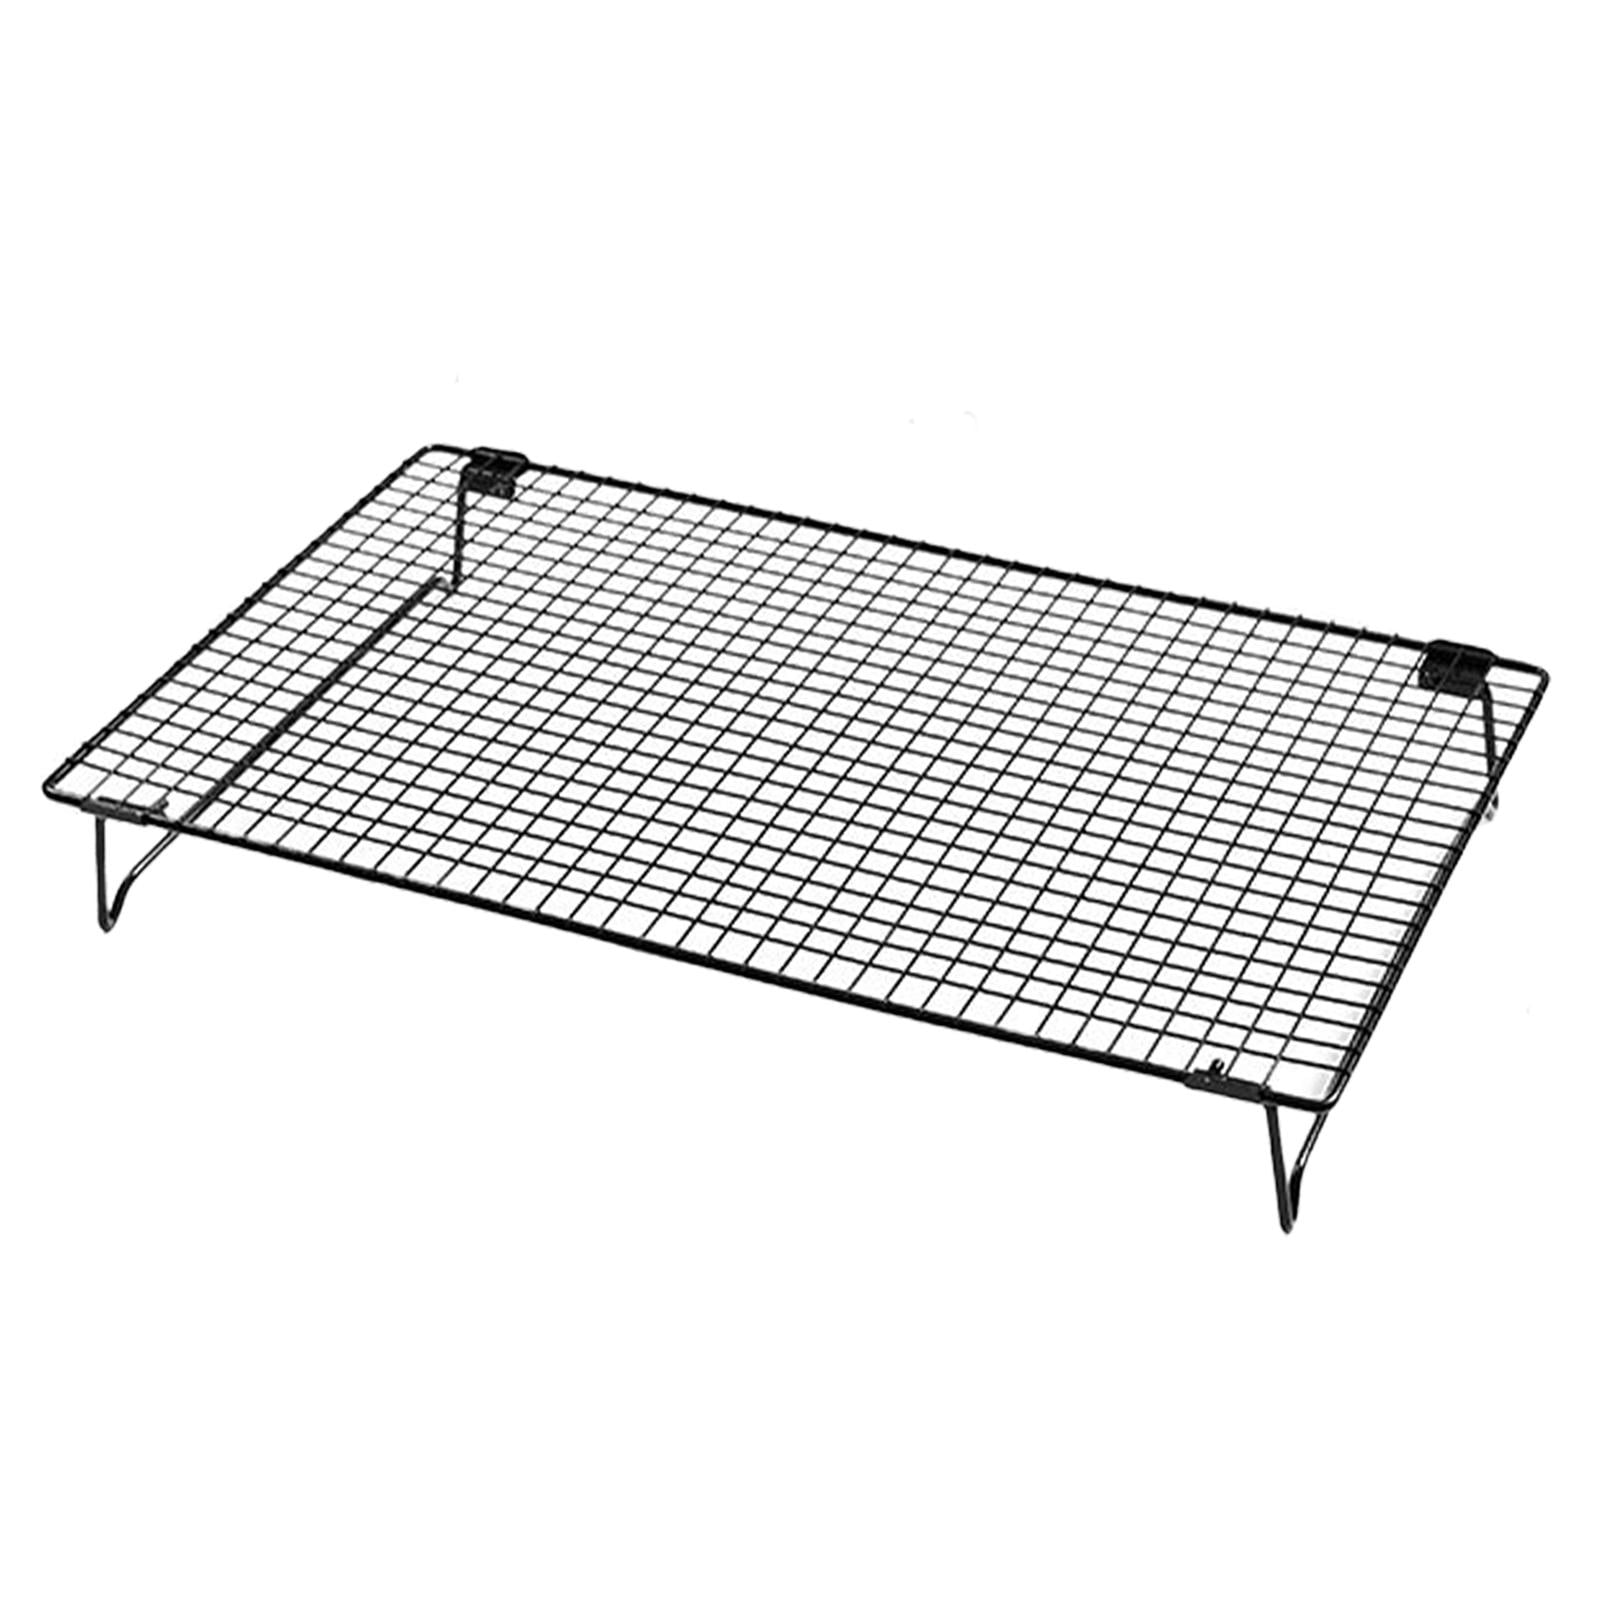 Choice Quarter Size 19 Gauge 9 1/2 x 13 Wire in Rim Aluminum Sheet Pan  with Footed Cooling Rack